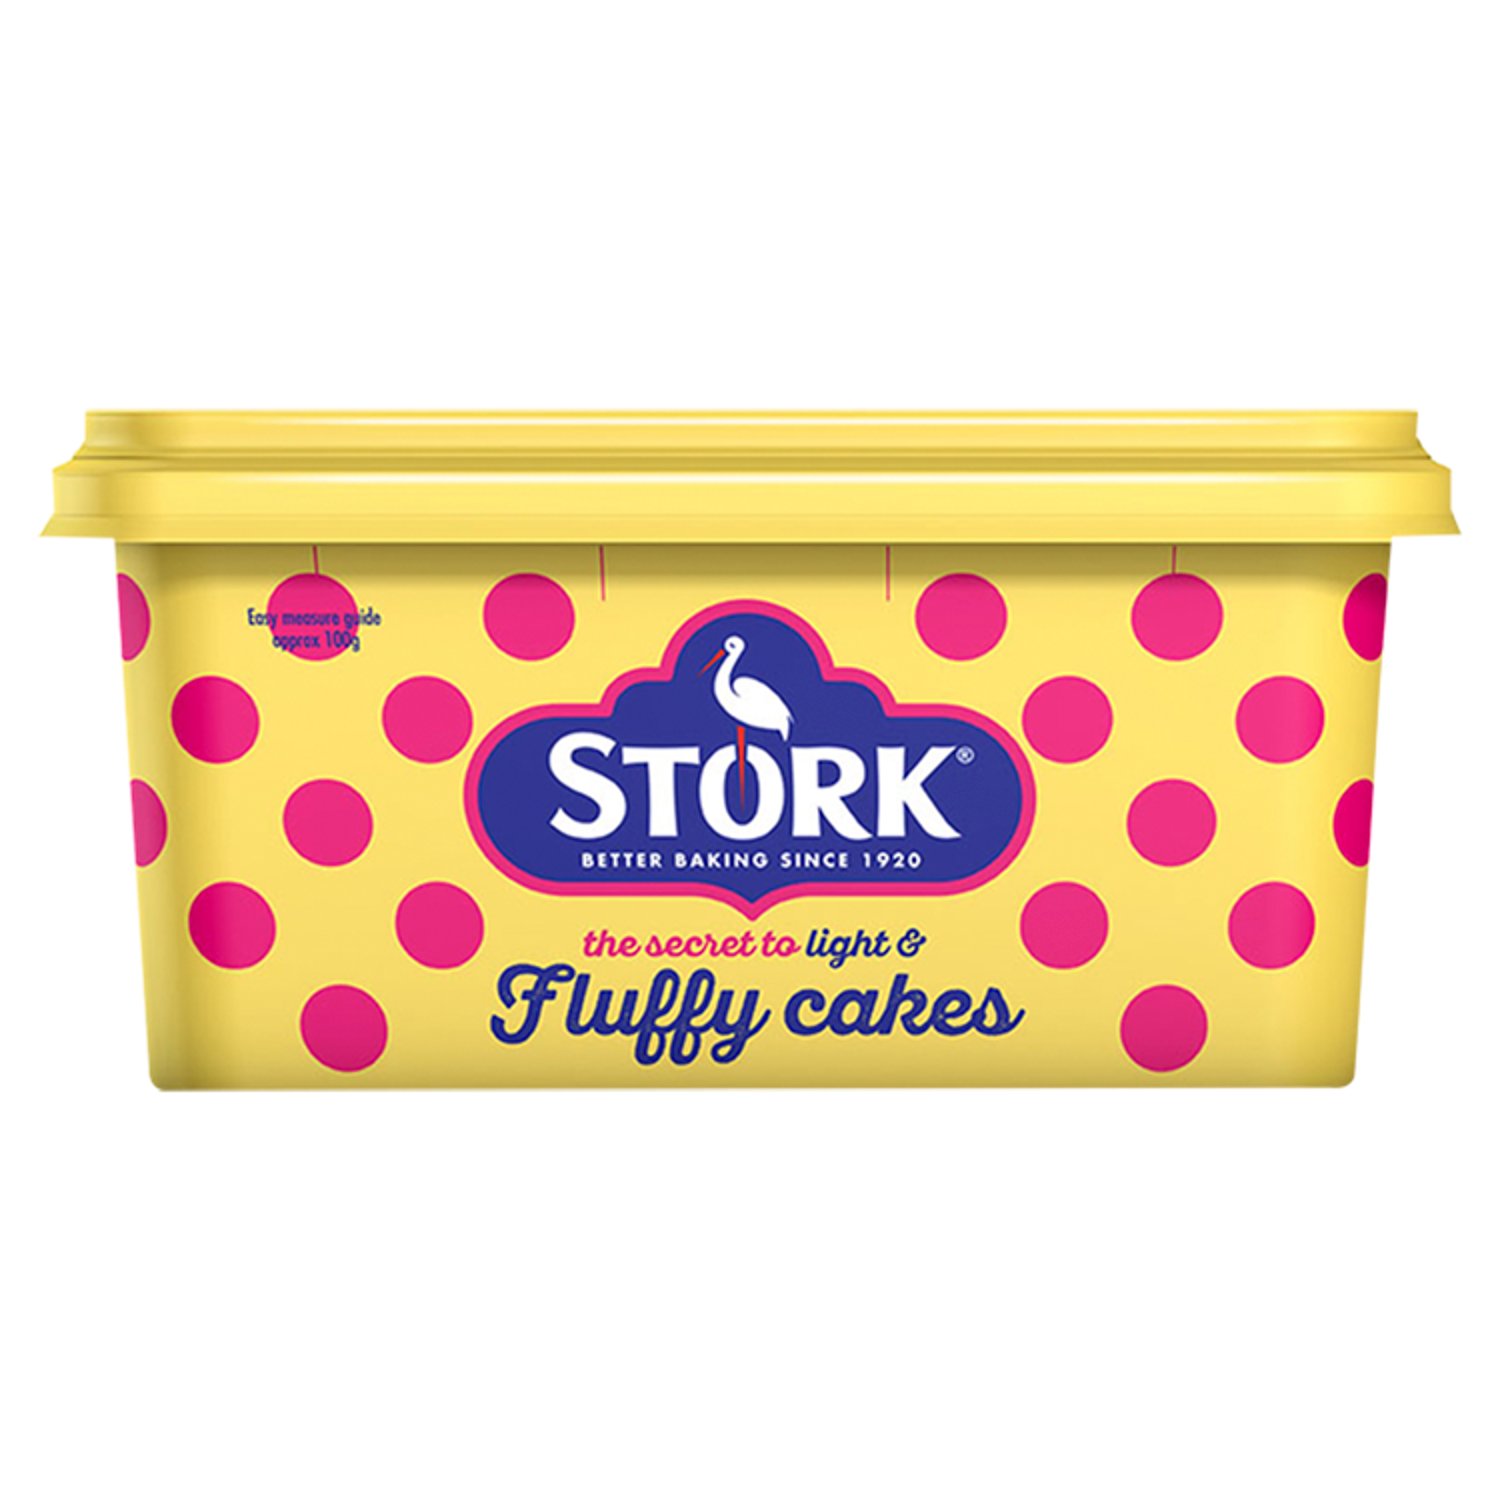 The Secret to Light and Fluffy Cakes.
Great for baking light, fluffy cakes, marvellous muffins, beautiful brownies and many delicious bakes.

Did You Know?
Stork contains 58% less saturated fat than butter